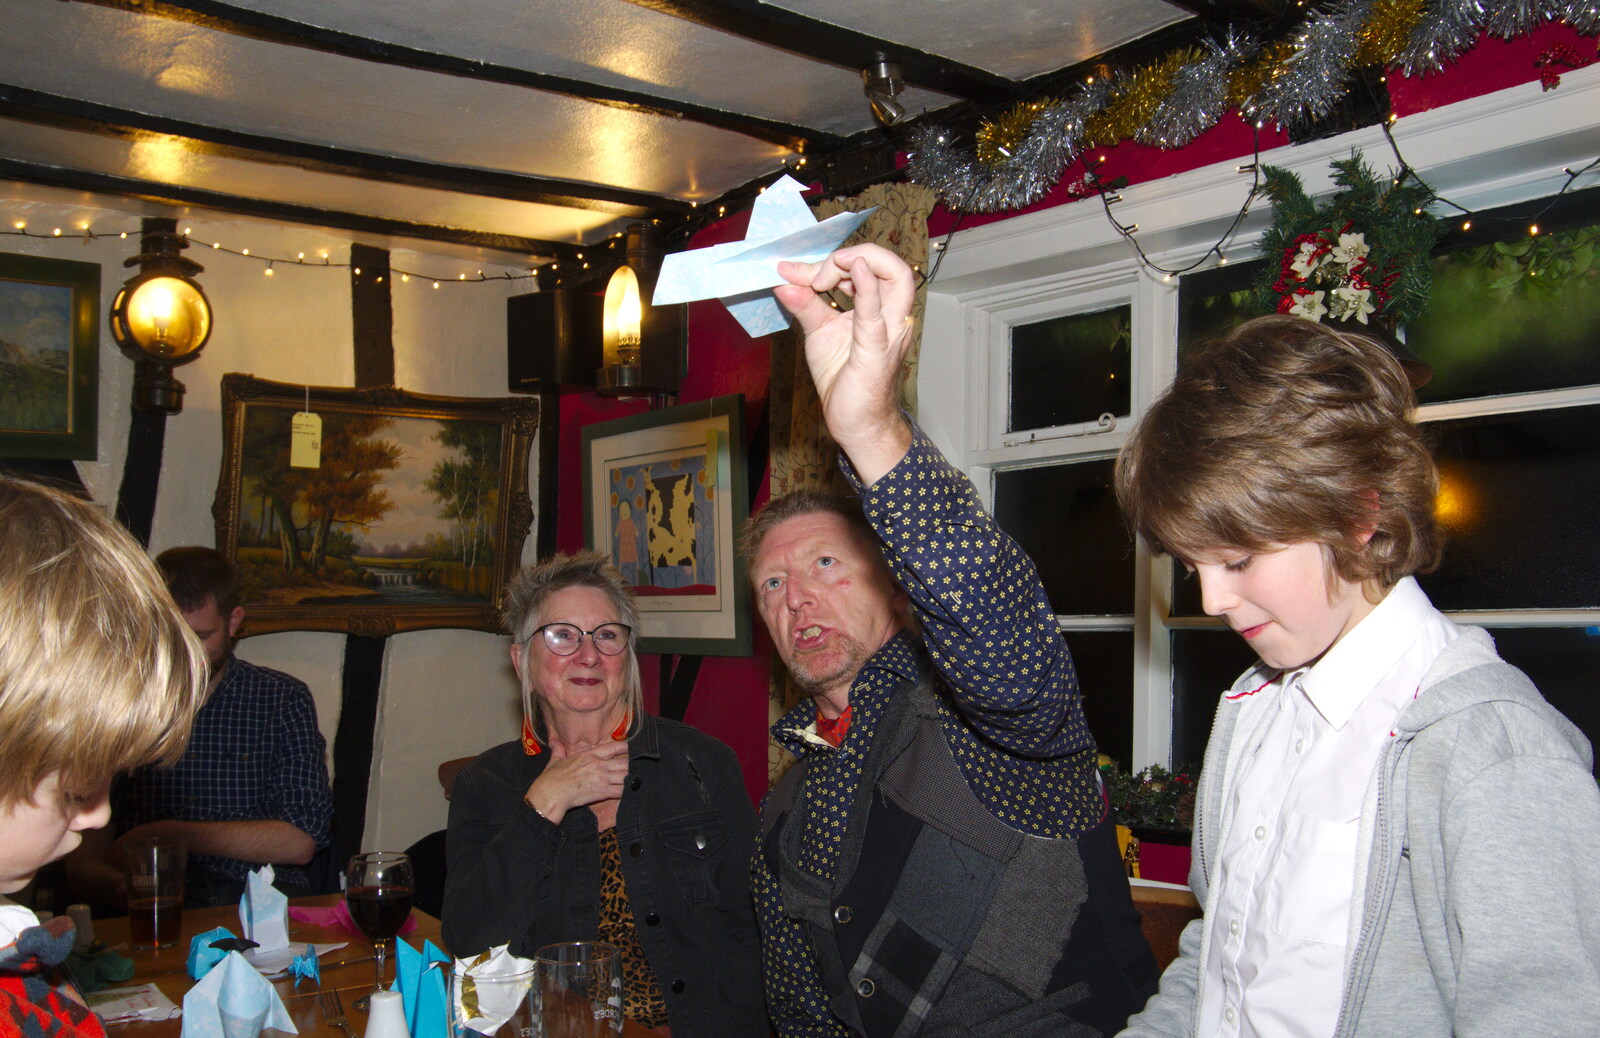 Gaz has a paper plane from GSB Concerts and the BSCC Christmas Dinner, Suffolk - 13th December 2019